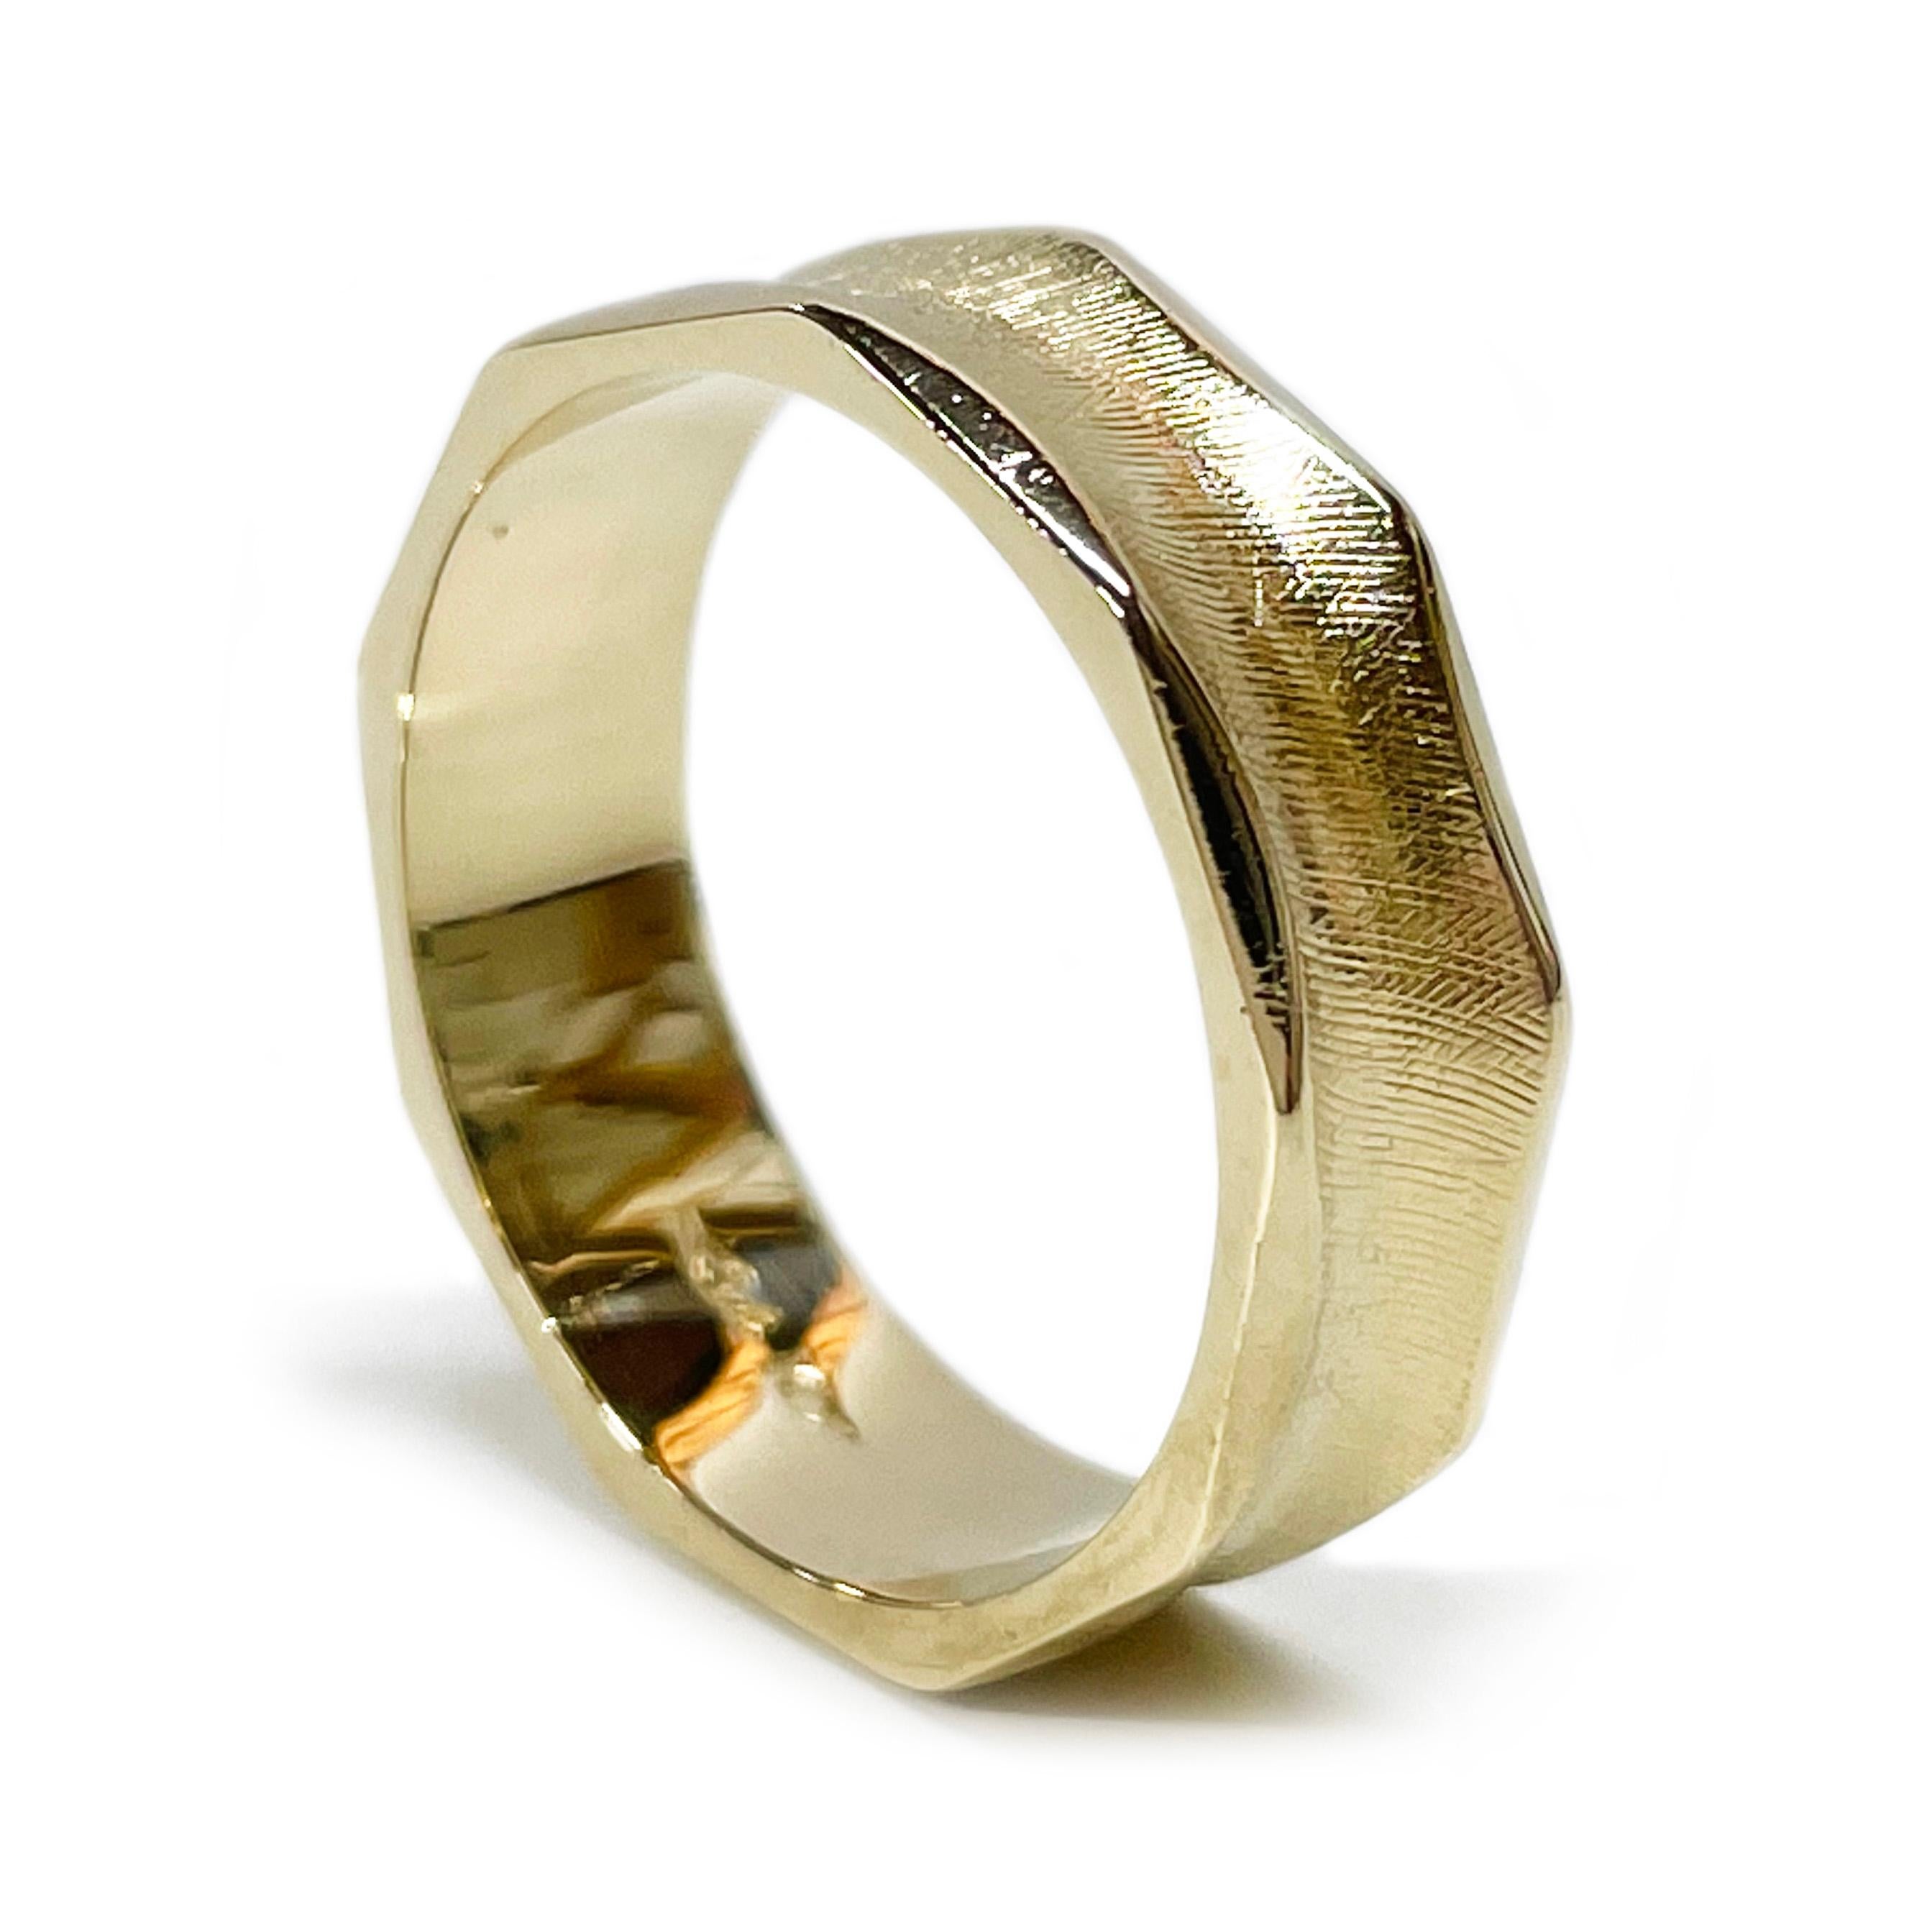 14 Karat Yellow Gold Wedding Band. The ring is concave with a Florentine finish at the center and shiny curved accents along the edge.  Stamped on the inside of the 6mm wide band is 14K. The ring size is 9 1/4. The ring has a gold weight of 5.4